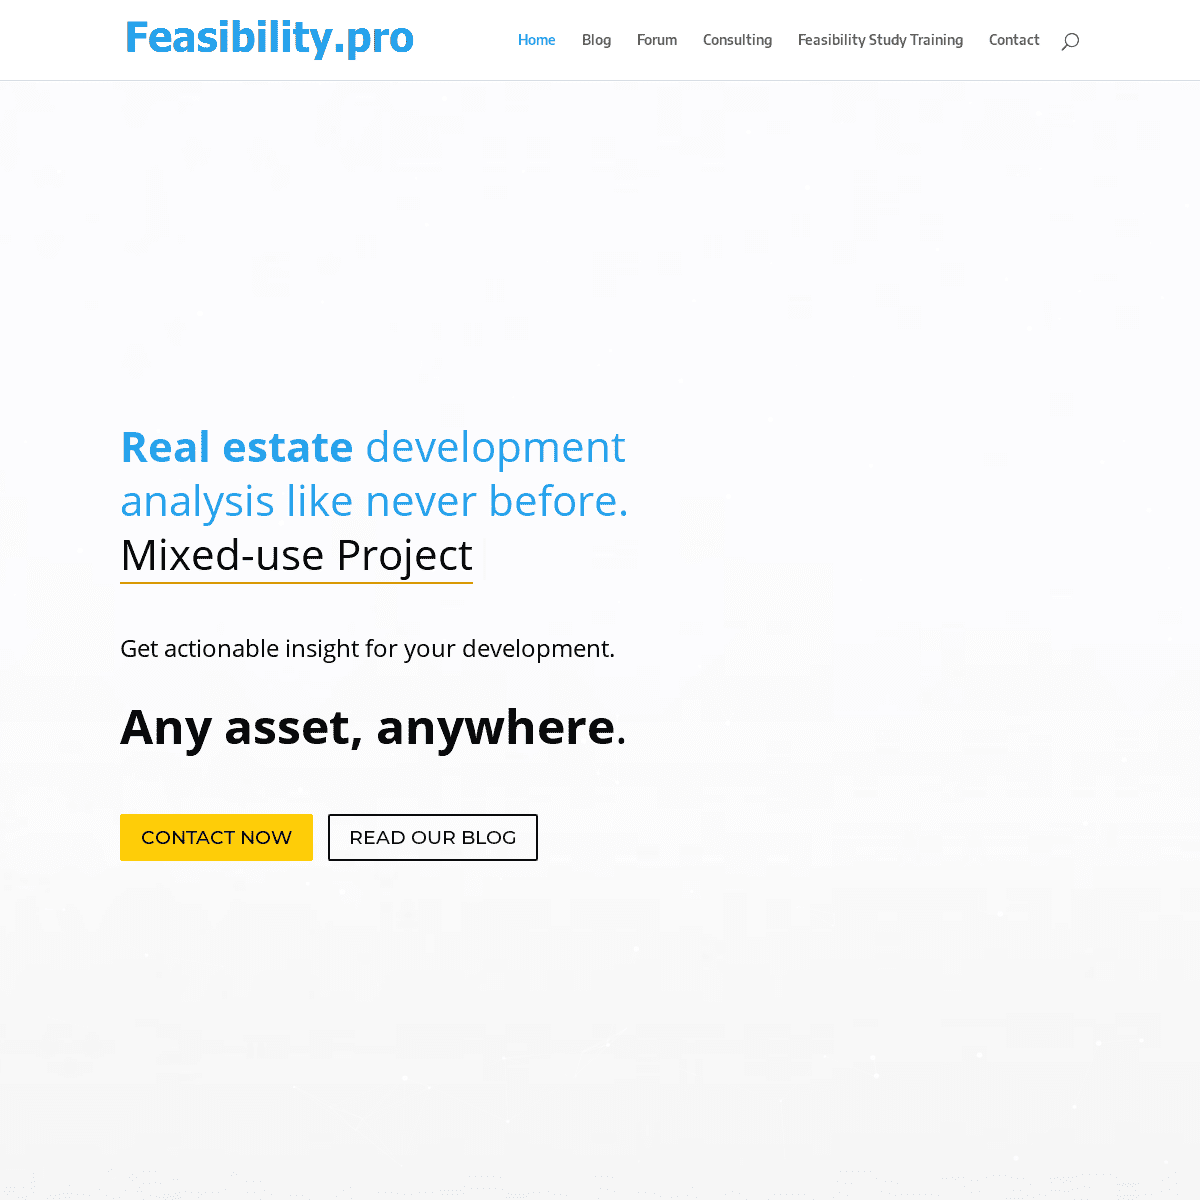 A complete backup of feasibility.pro